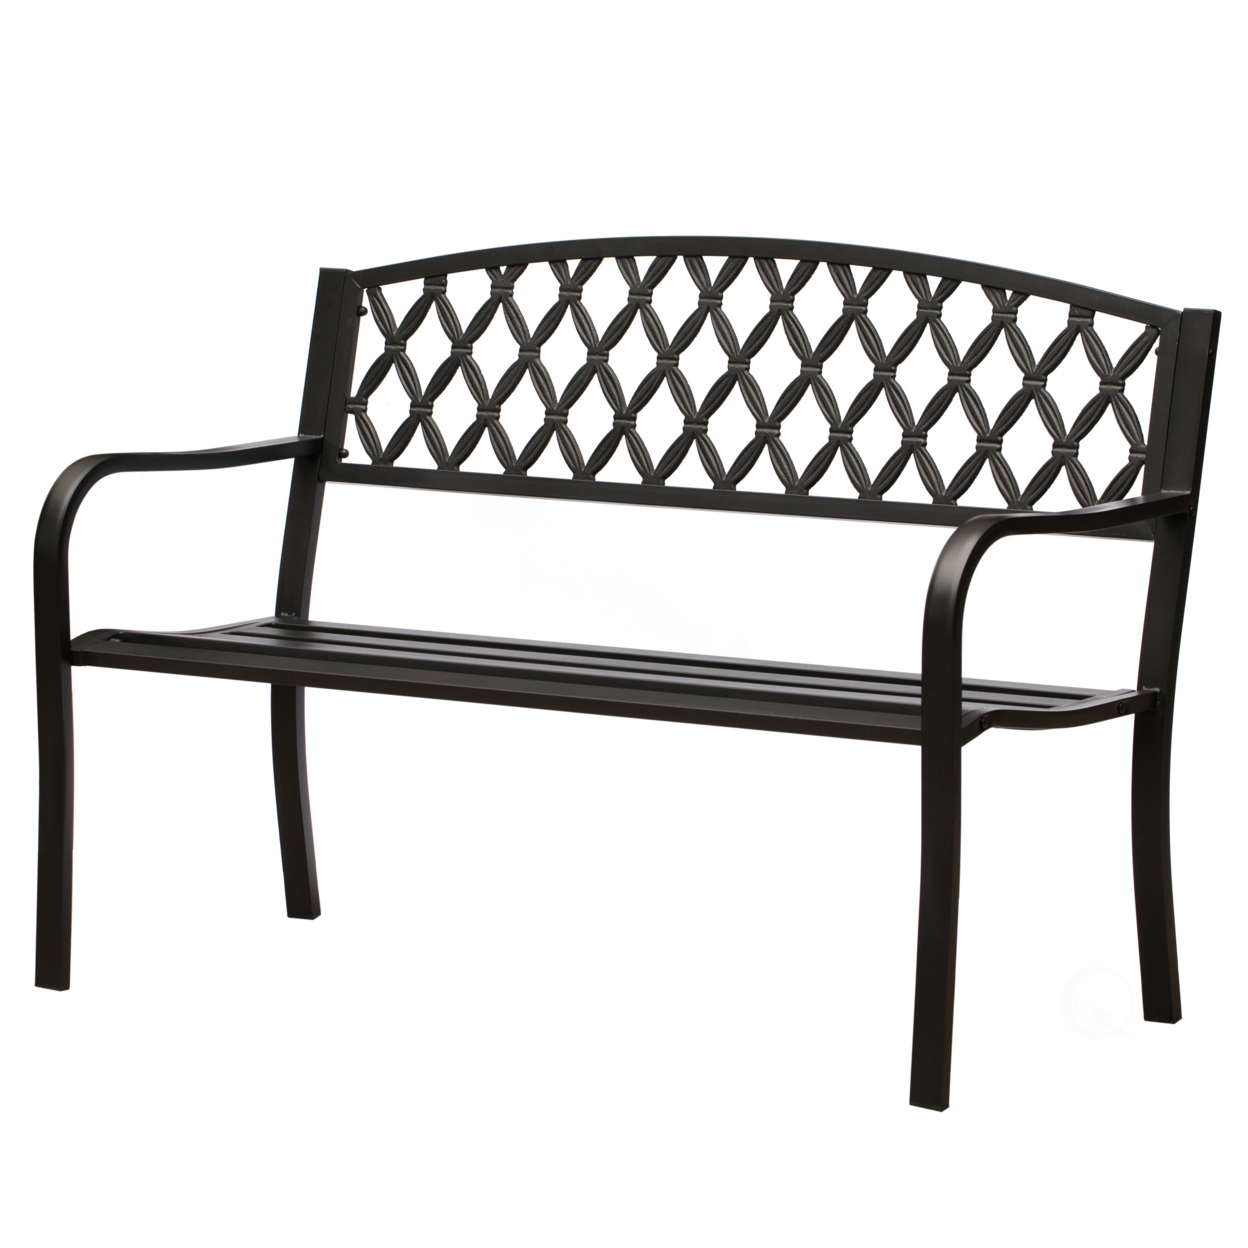 Gardenised Black Outdoor Garden Patio Steel Park Bench Lawn Decor With Cast Iron Back Seating Bench, With Backrest And Armrest